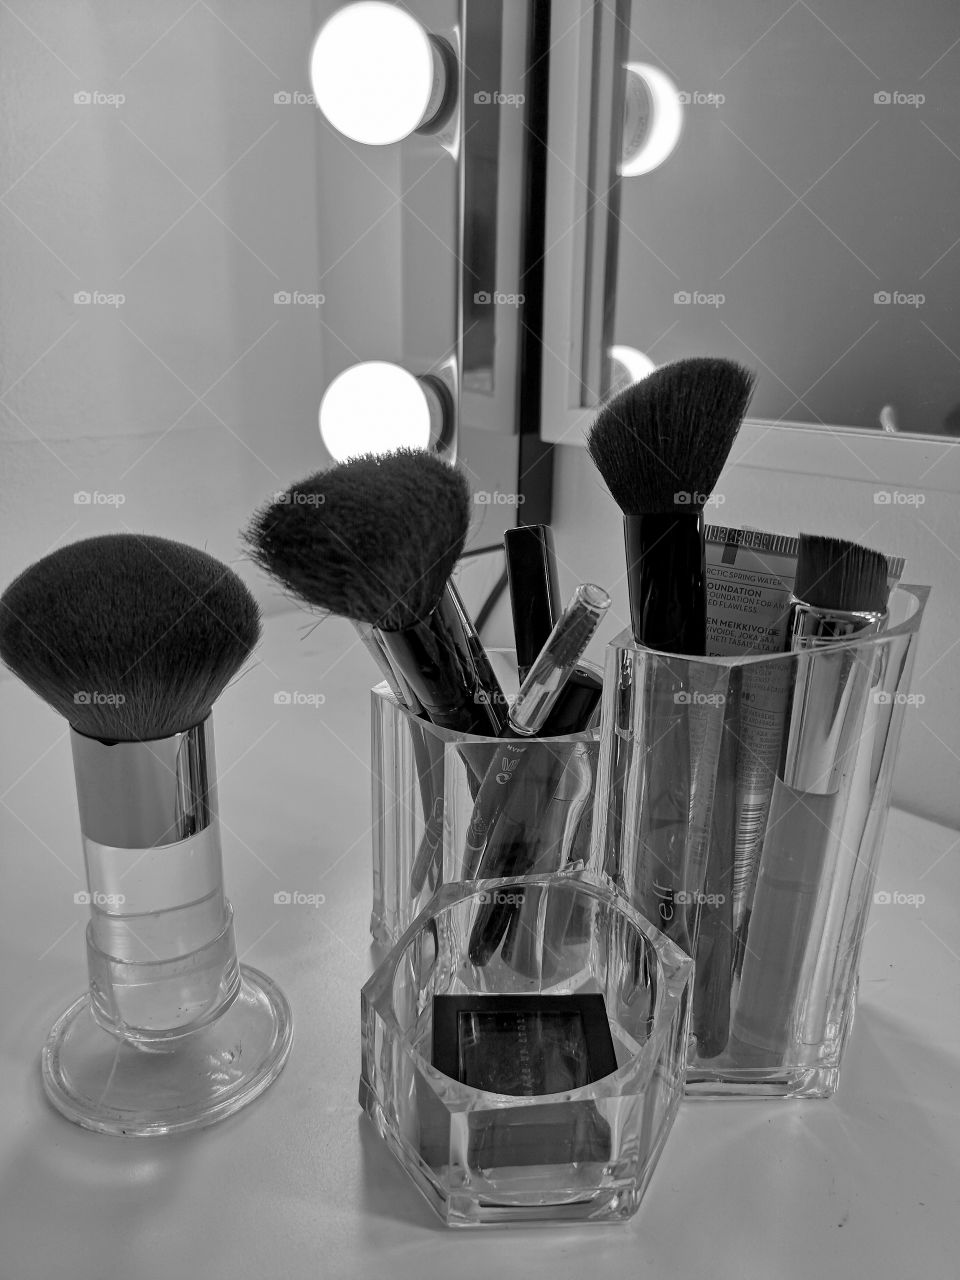 Make up brushes on a make up table and mirror with lights